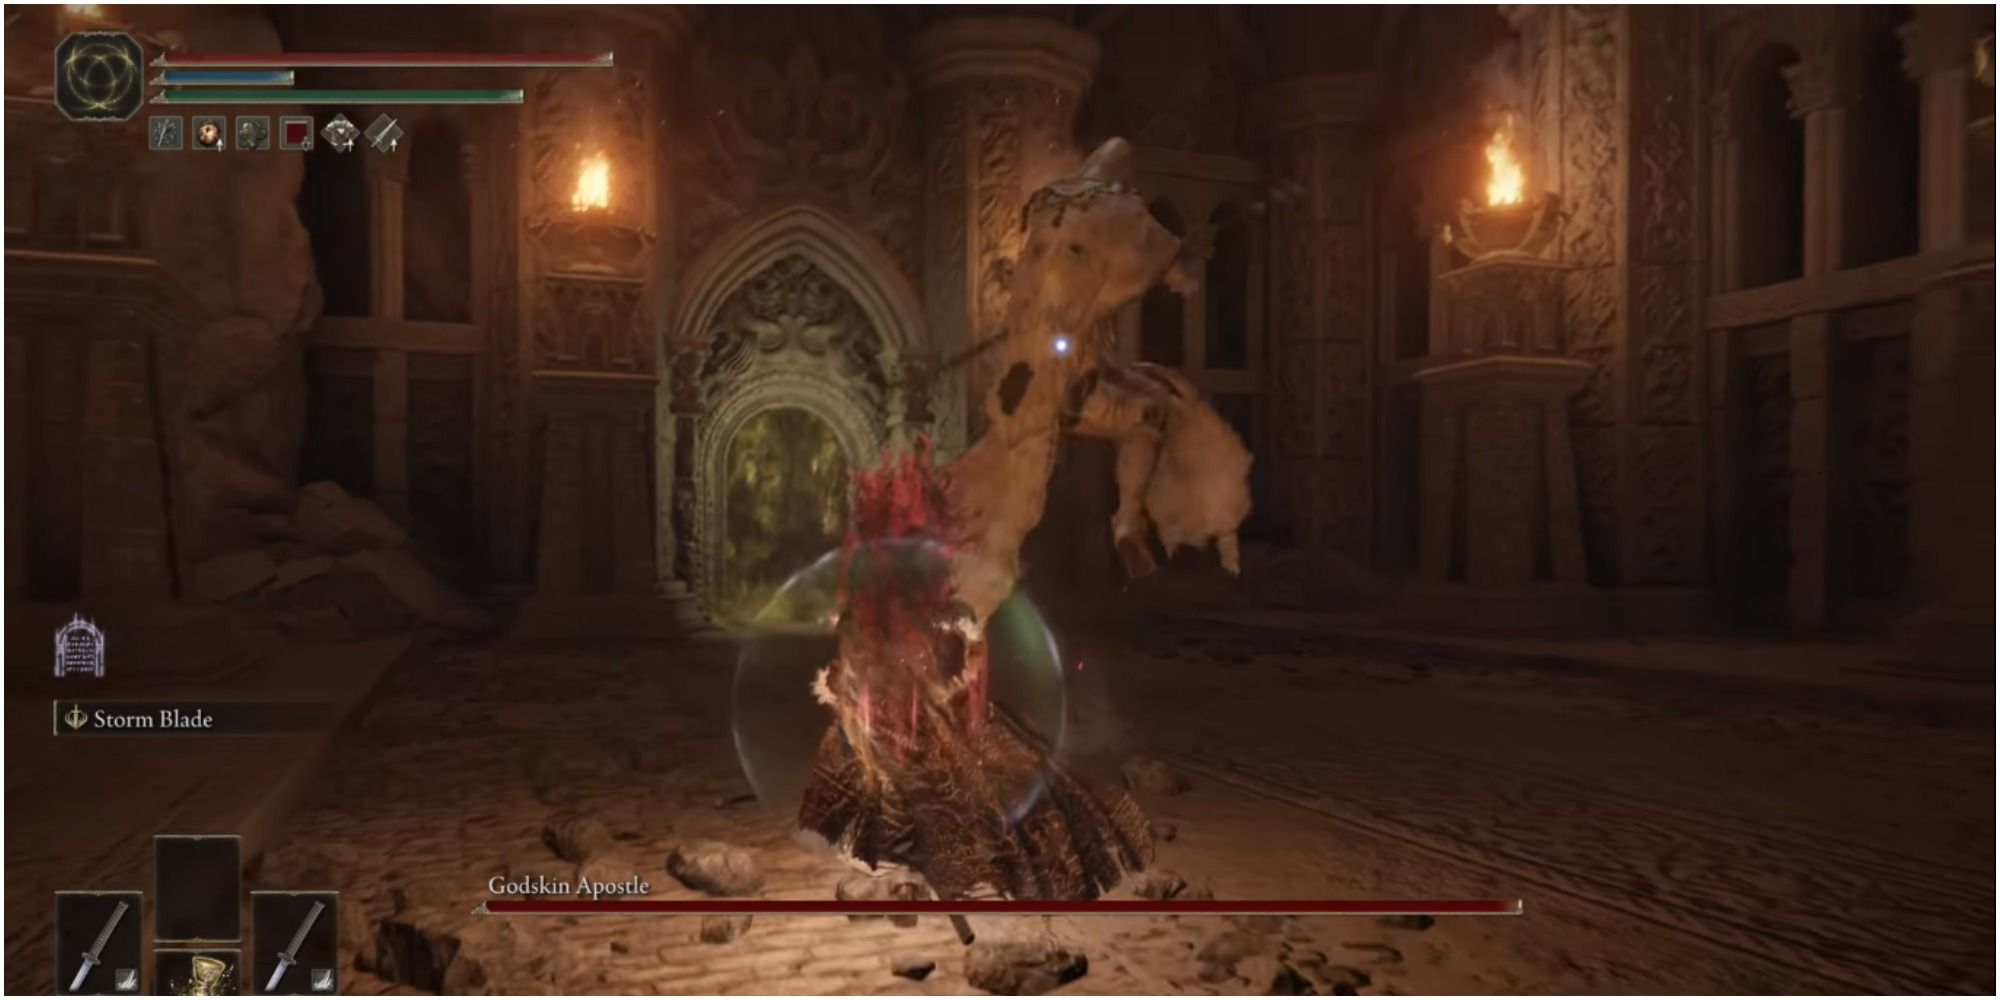 The player approaching the boss underneath the Divine Tower of Caelid.